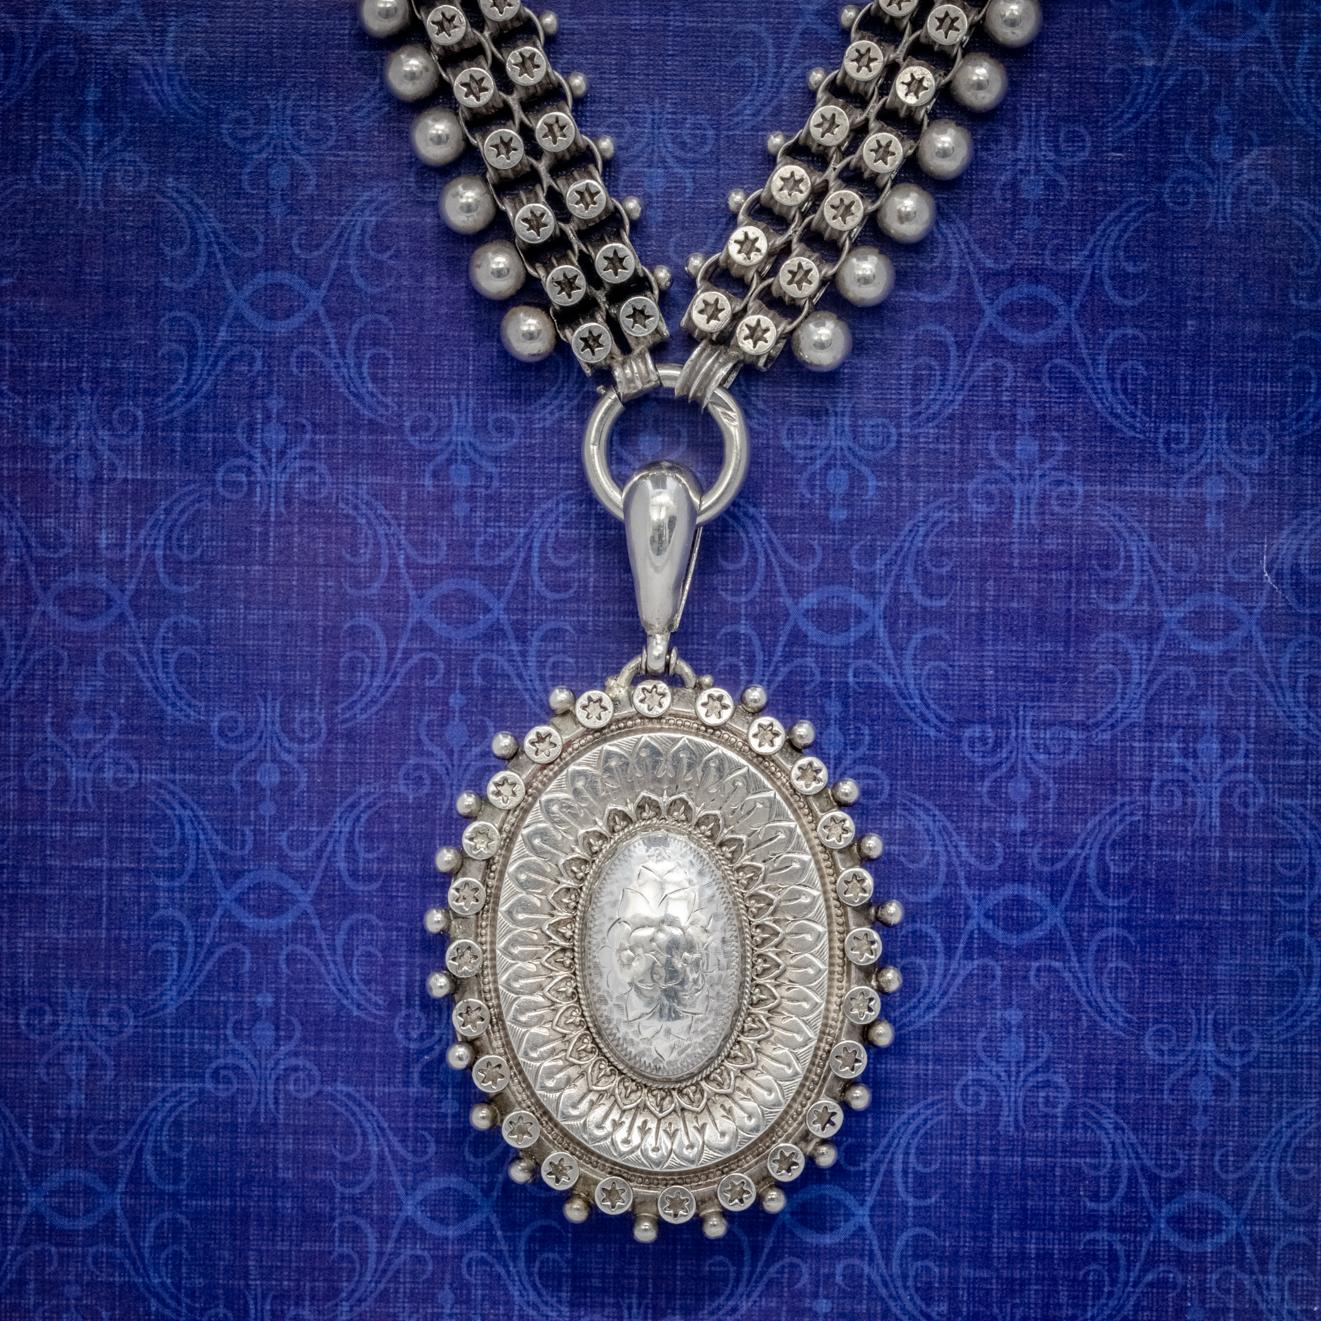 A grand Antique Late-Victorian locket and collar made Circa 1880. The locket is fashioned in Sterling Silver and displays intricate engraved workmanship with Silver balls and stars surrounding the border and lovely etched Forget me nots on the